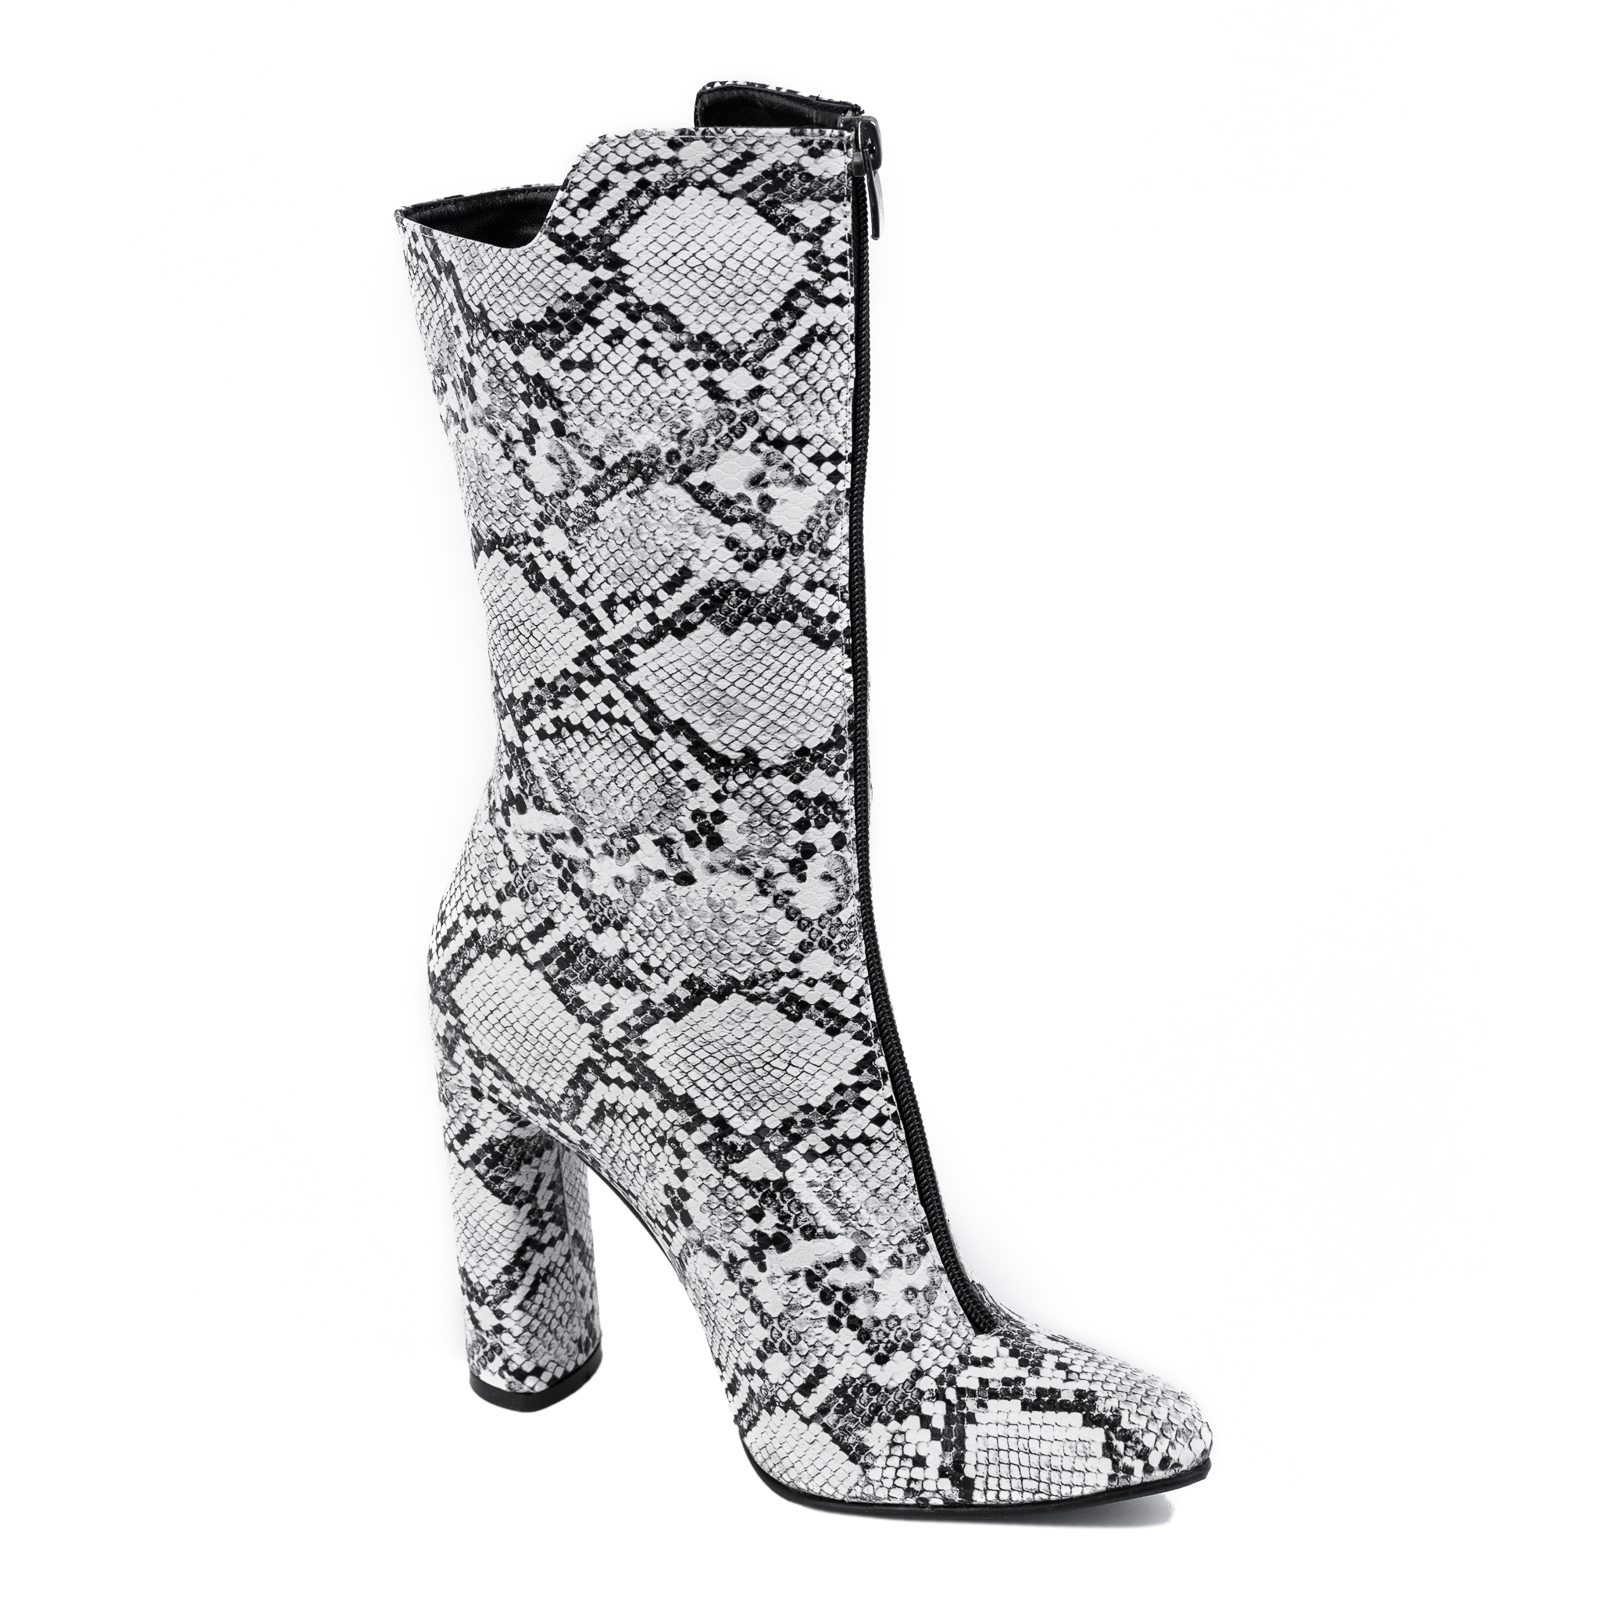 SNAKE BOOTS WITH ZIPPER AND BLOCK HEEL - WHITE/BLACK